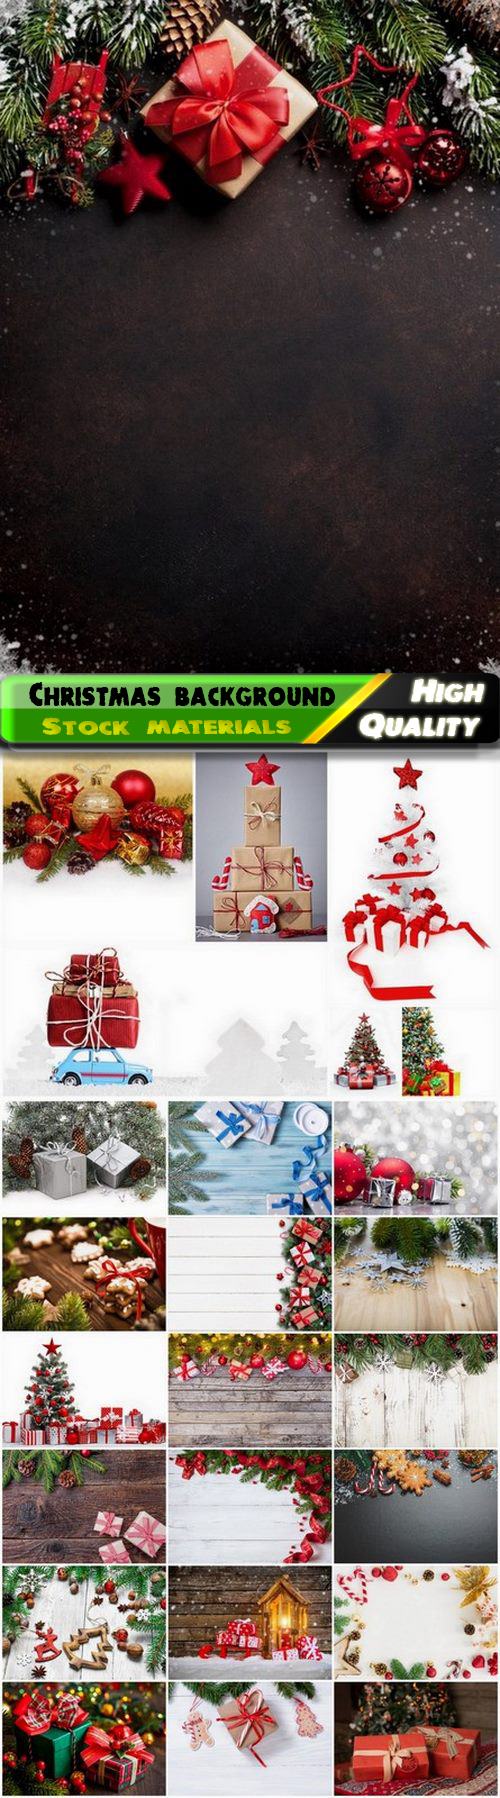 New Year and Christmas fir tree with branches and gifts 25 HQ Jpg